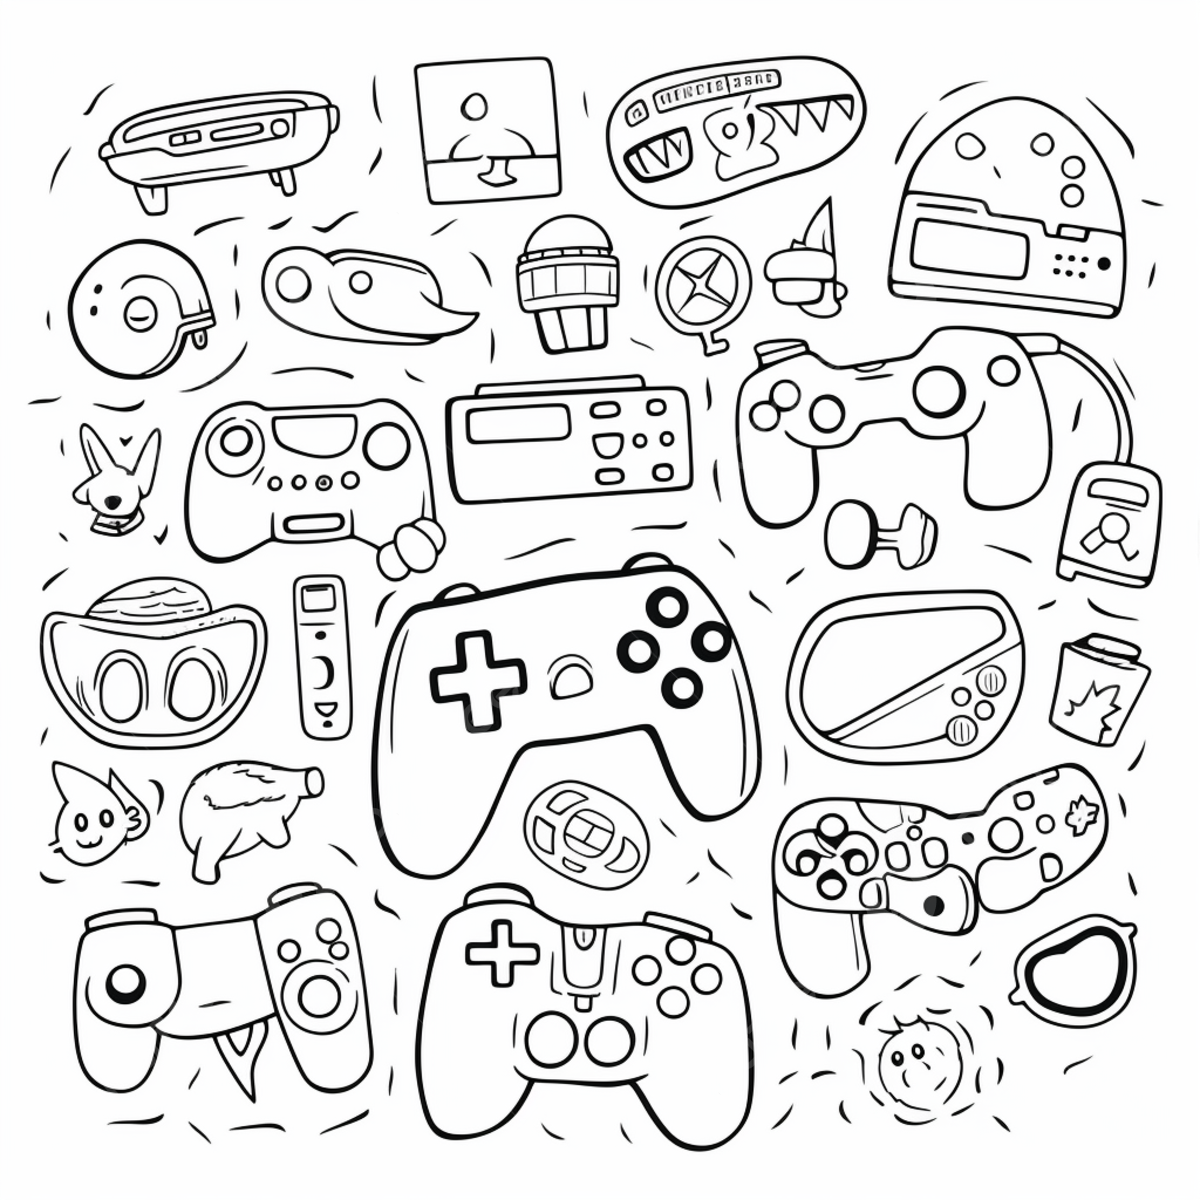 Coloring page of video game controllers ring drawing controller drawing video game controller drawing png transparent image and clipart for free download